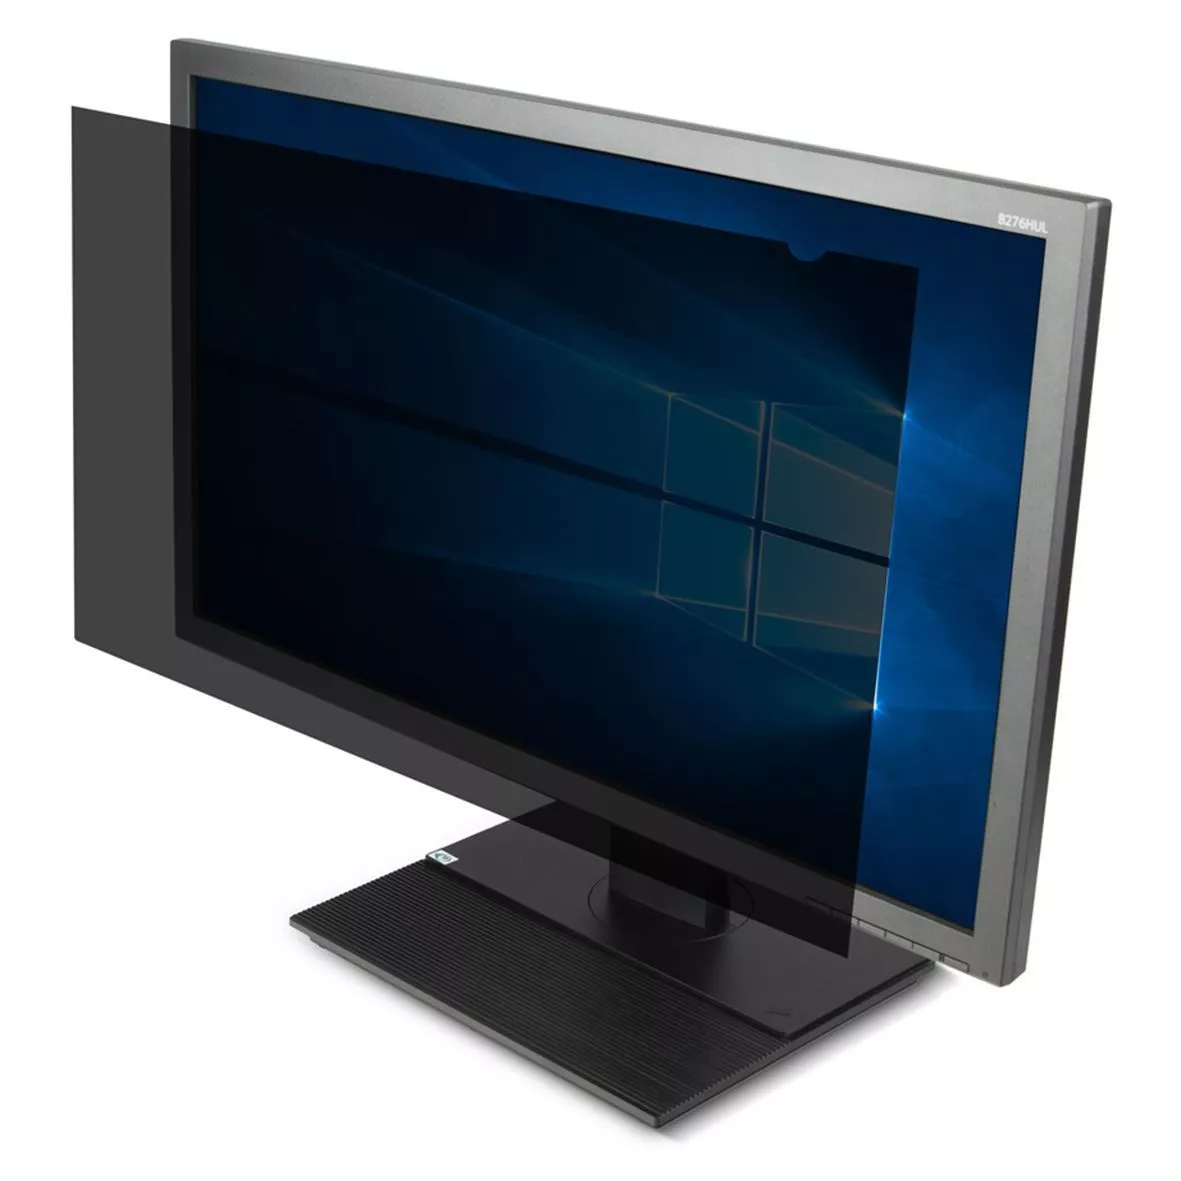 Revendeur officiel TARGUS 19 LCD Monitor Privacy Screen - privacy-filter voor